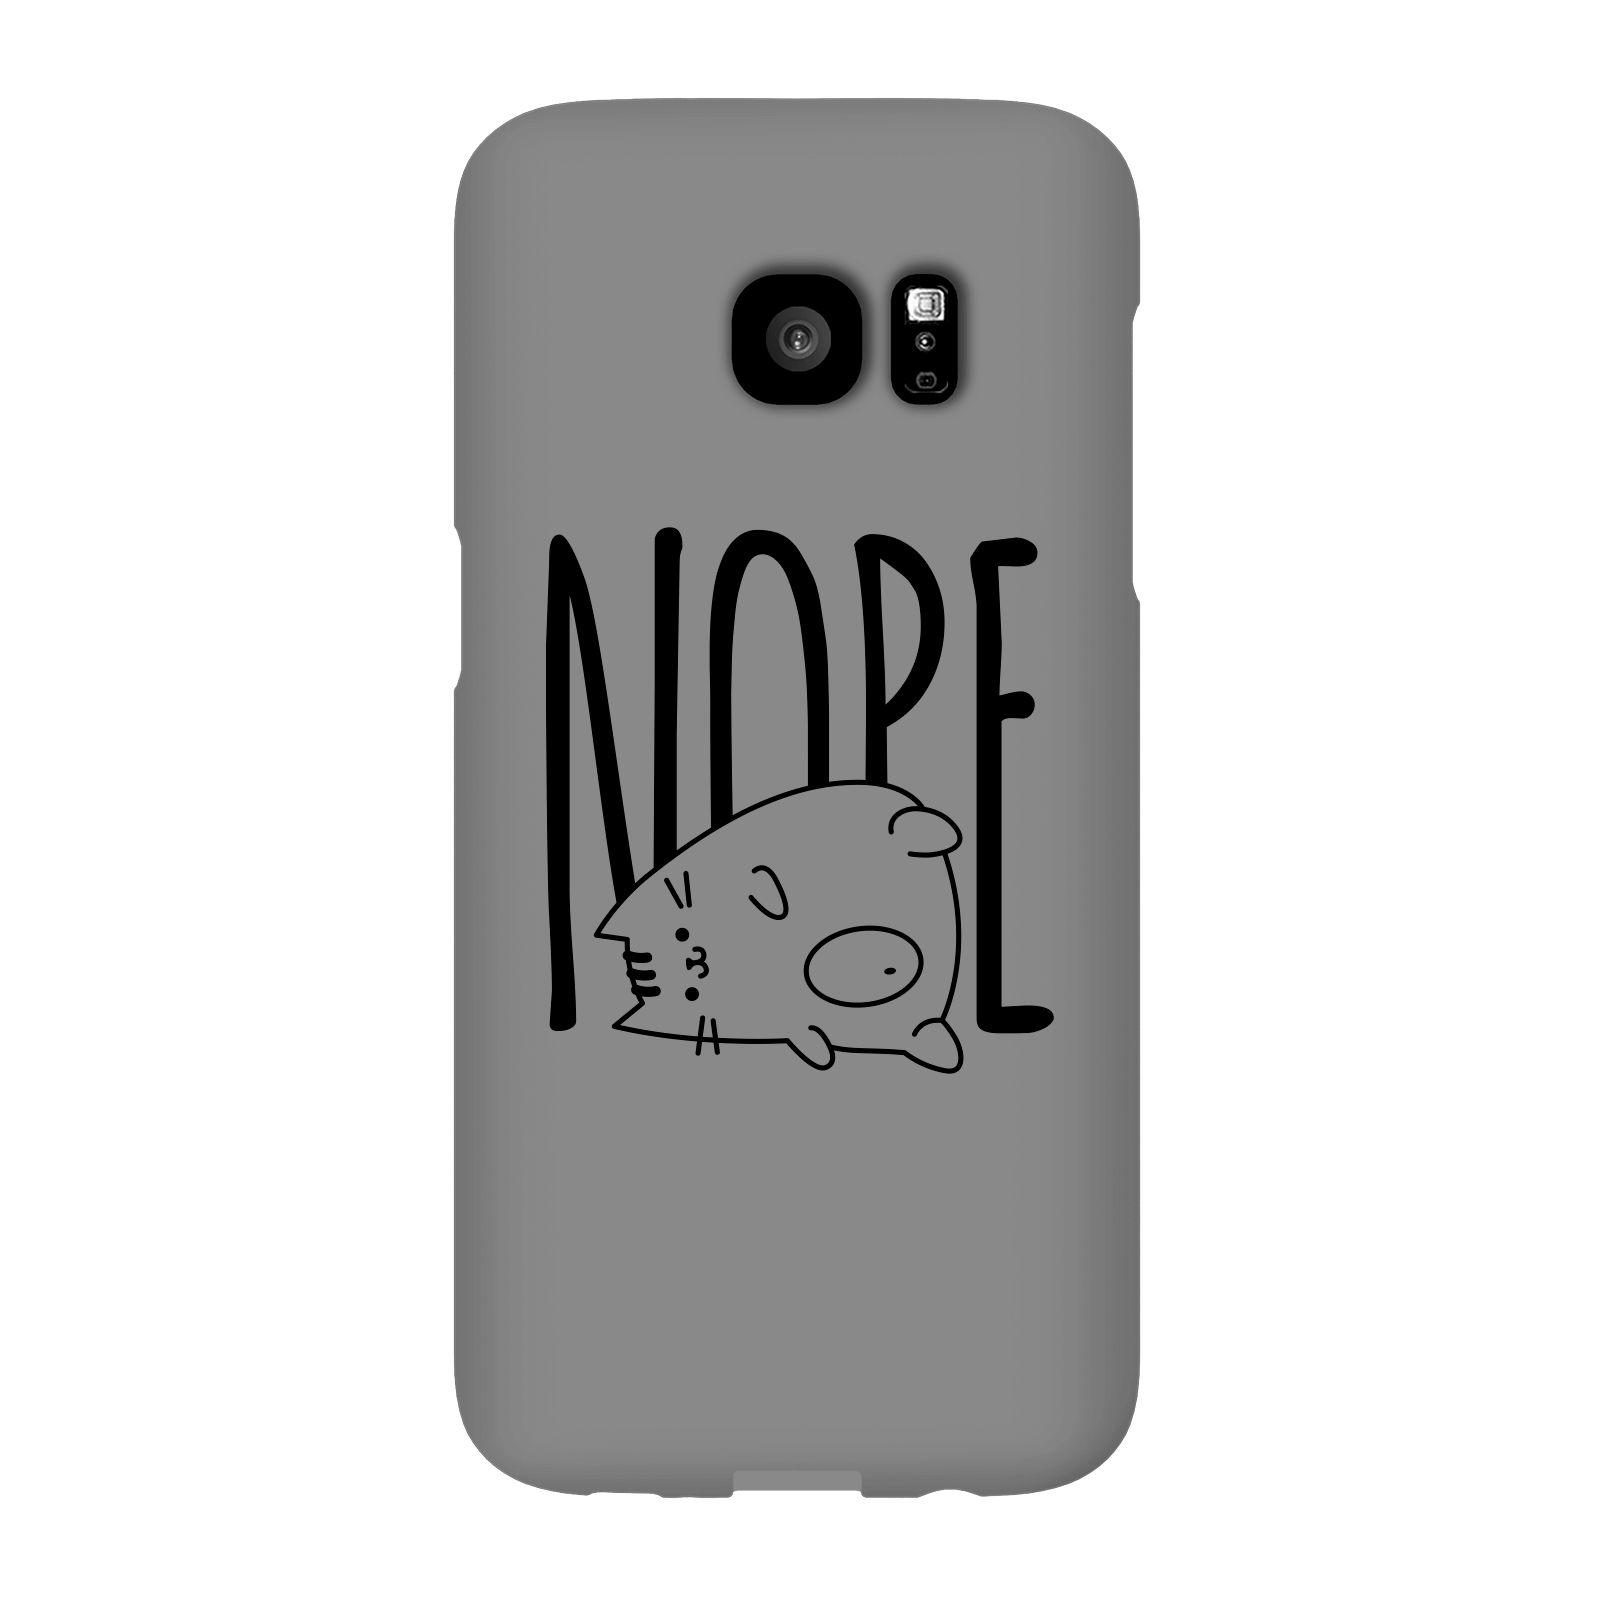 Nope Phone Case for iPhone and Android - Samsung S7 Edge - Snap Case - Matte